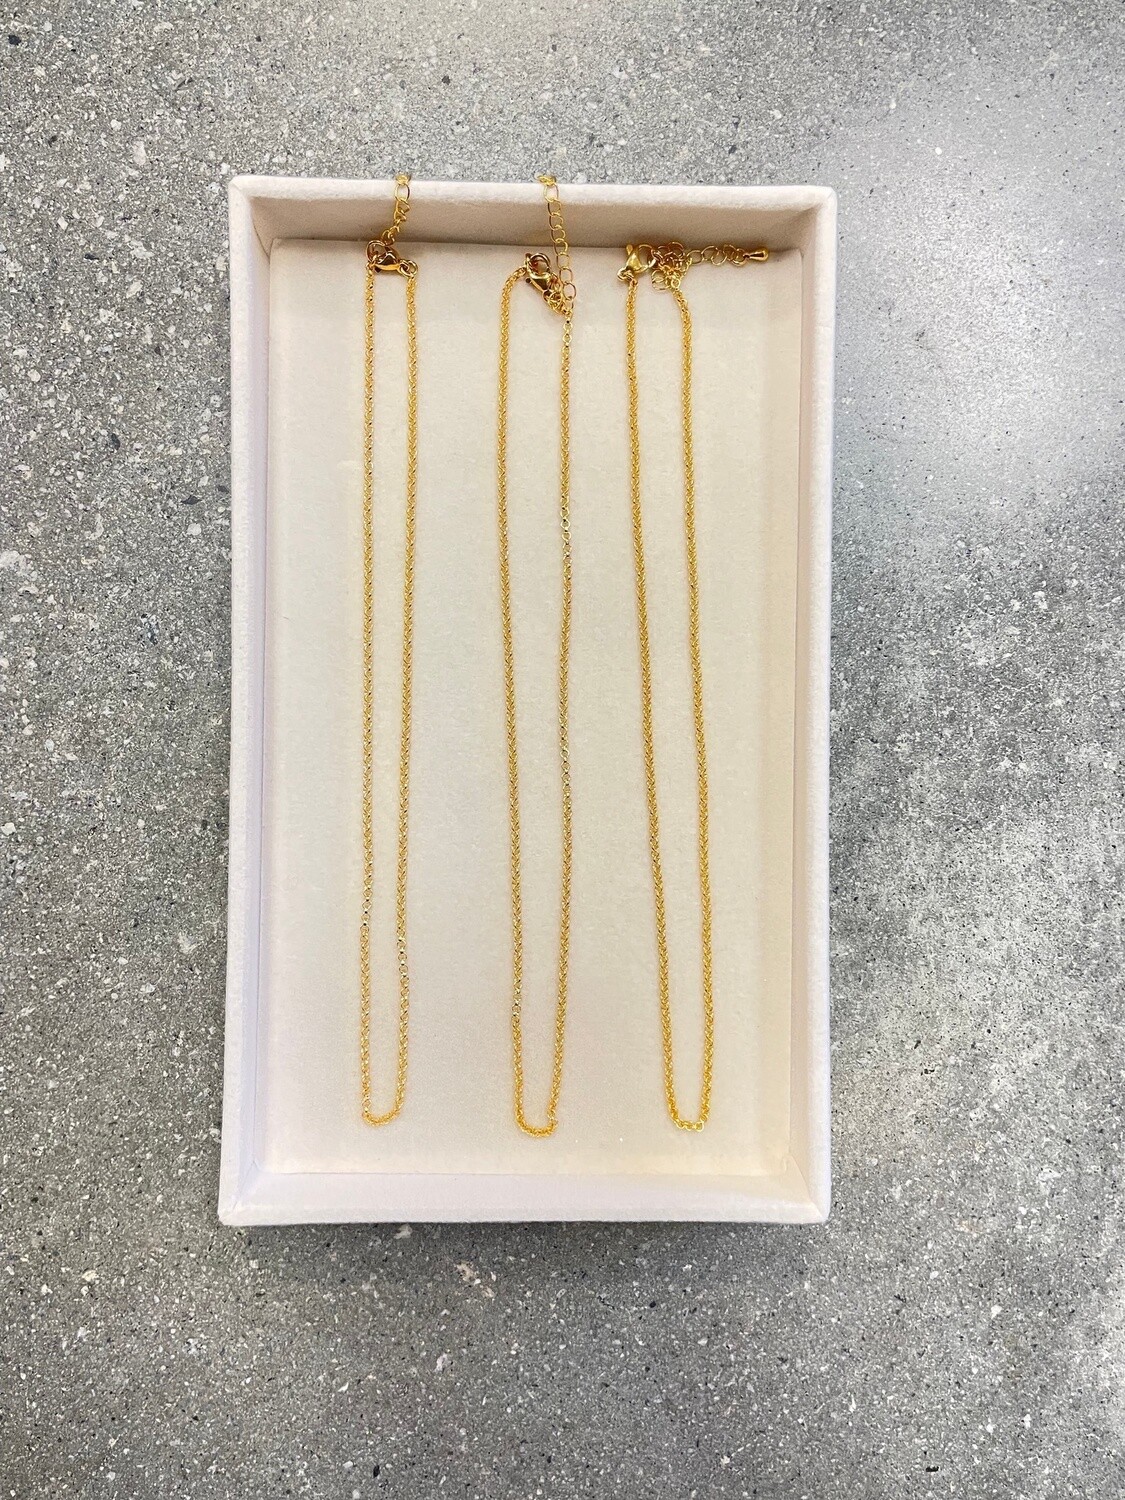 14K GF Necklace Chain Only